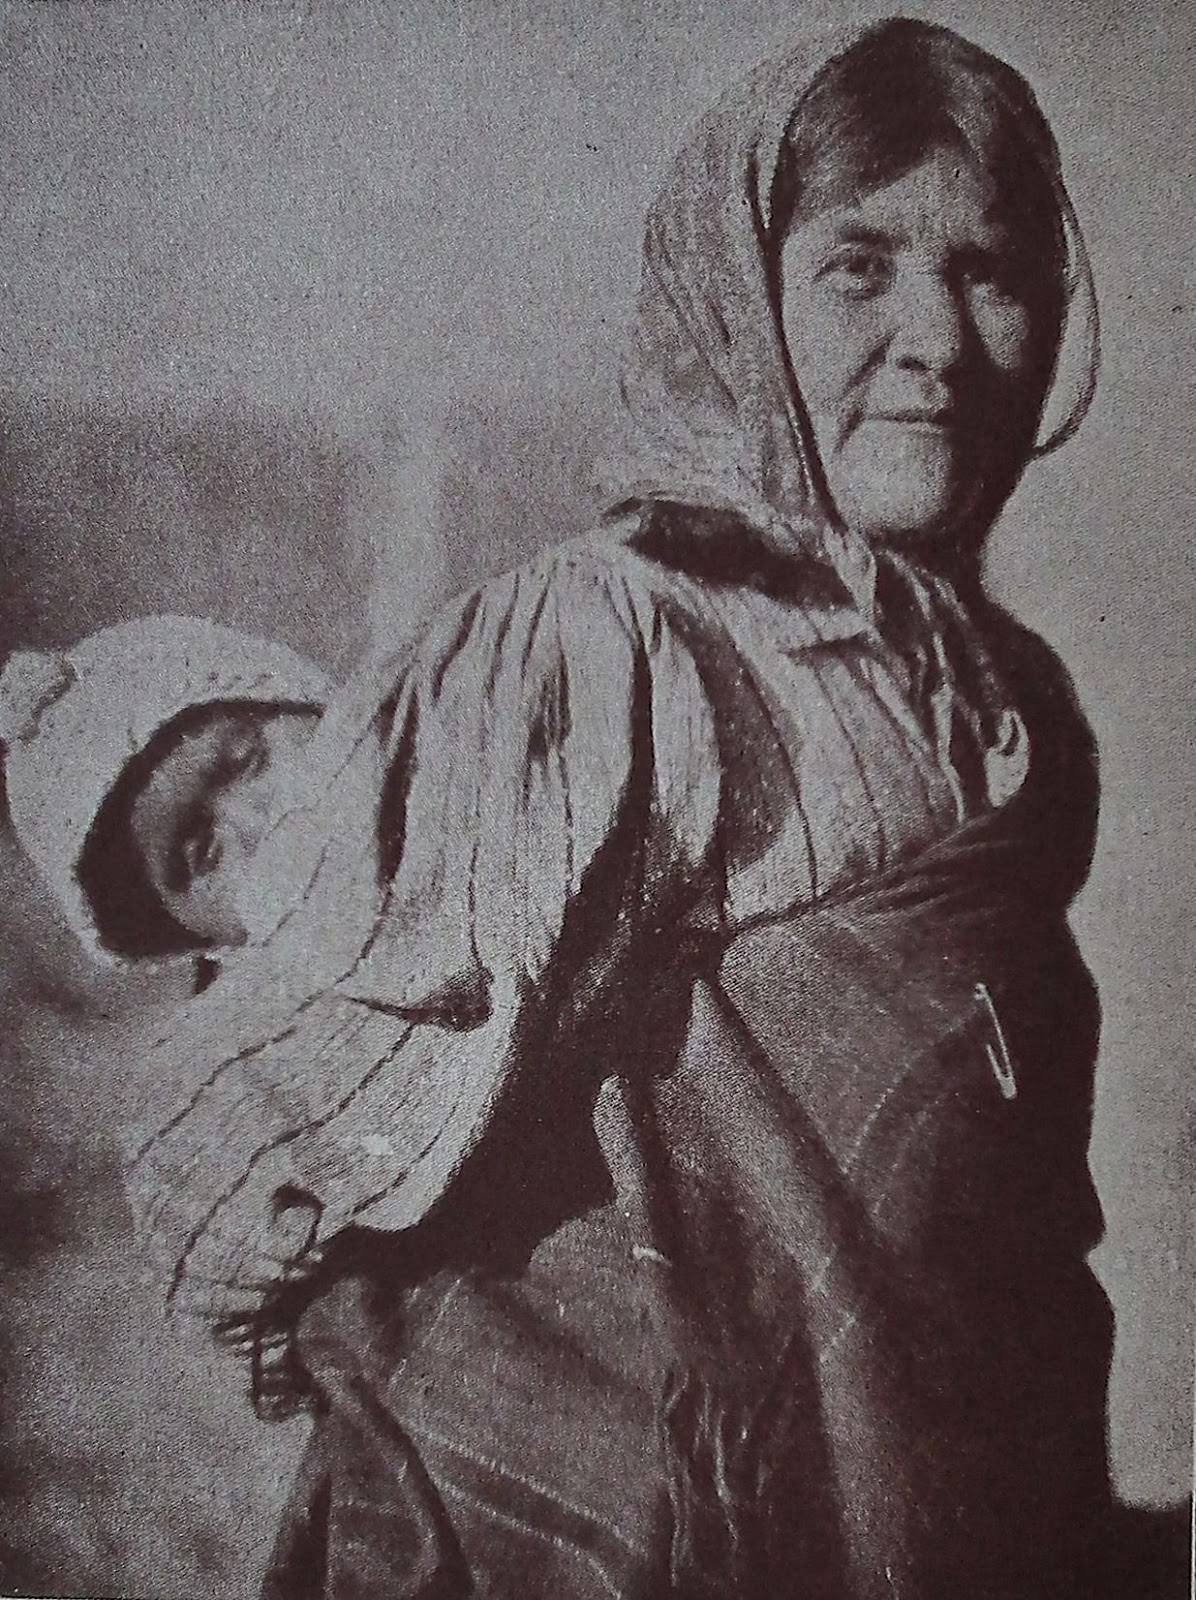 Chemehuevi wife with baby.